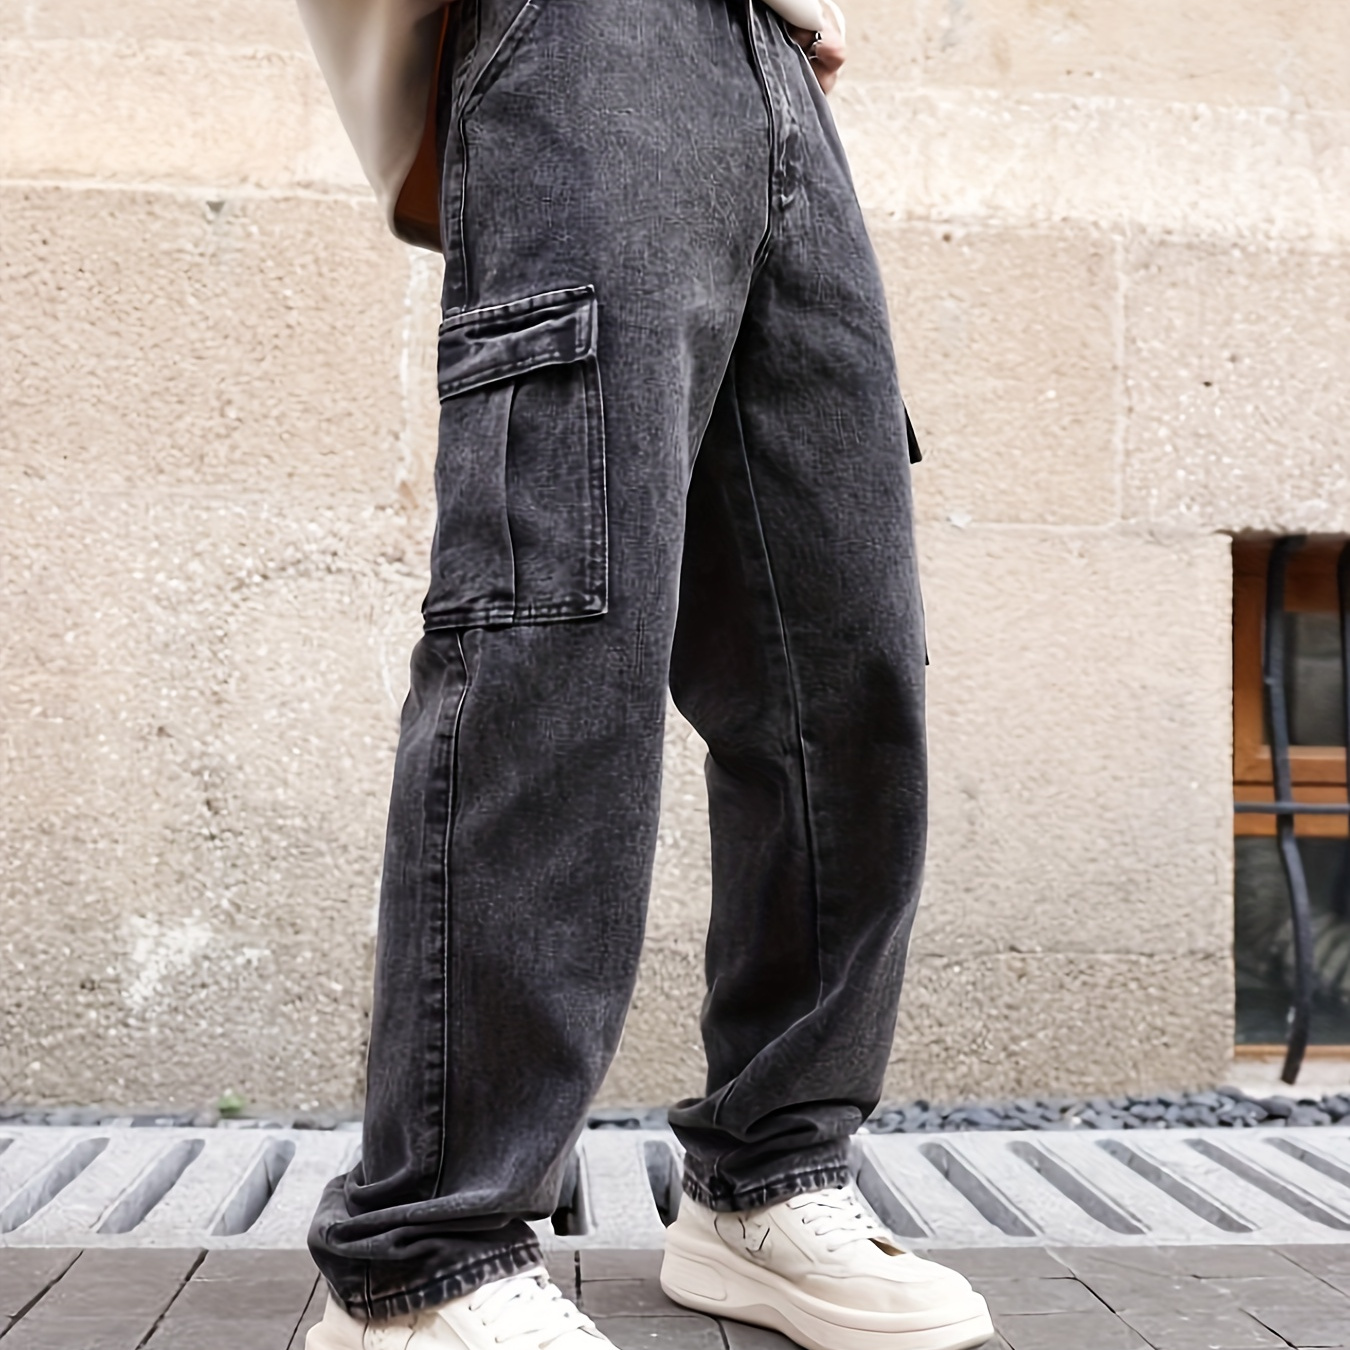 

Loose Fit Flap Pocket Jeans, Men's Causal Street Style Cargo Jeans For All Seasons